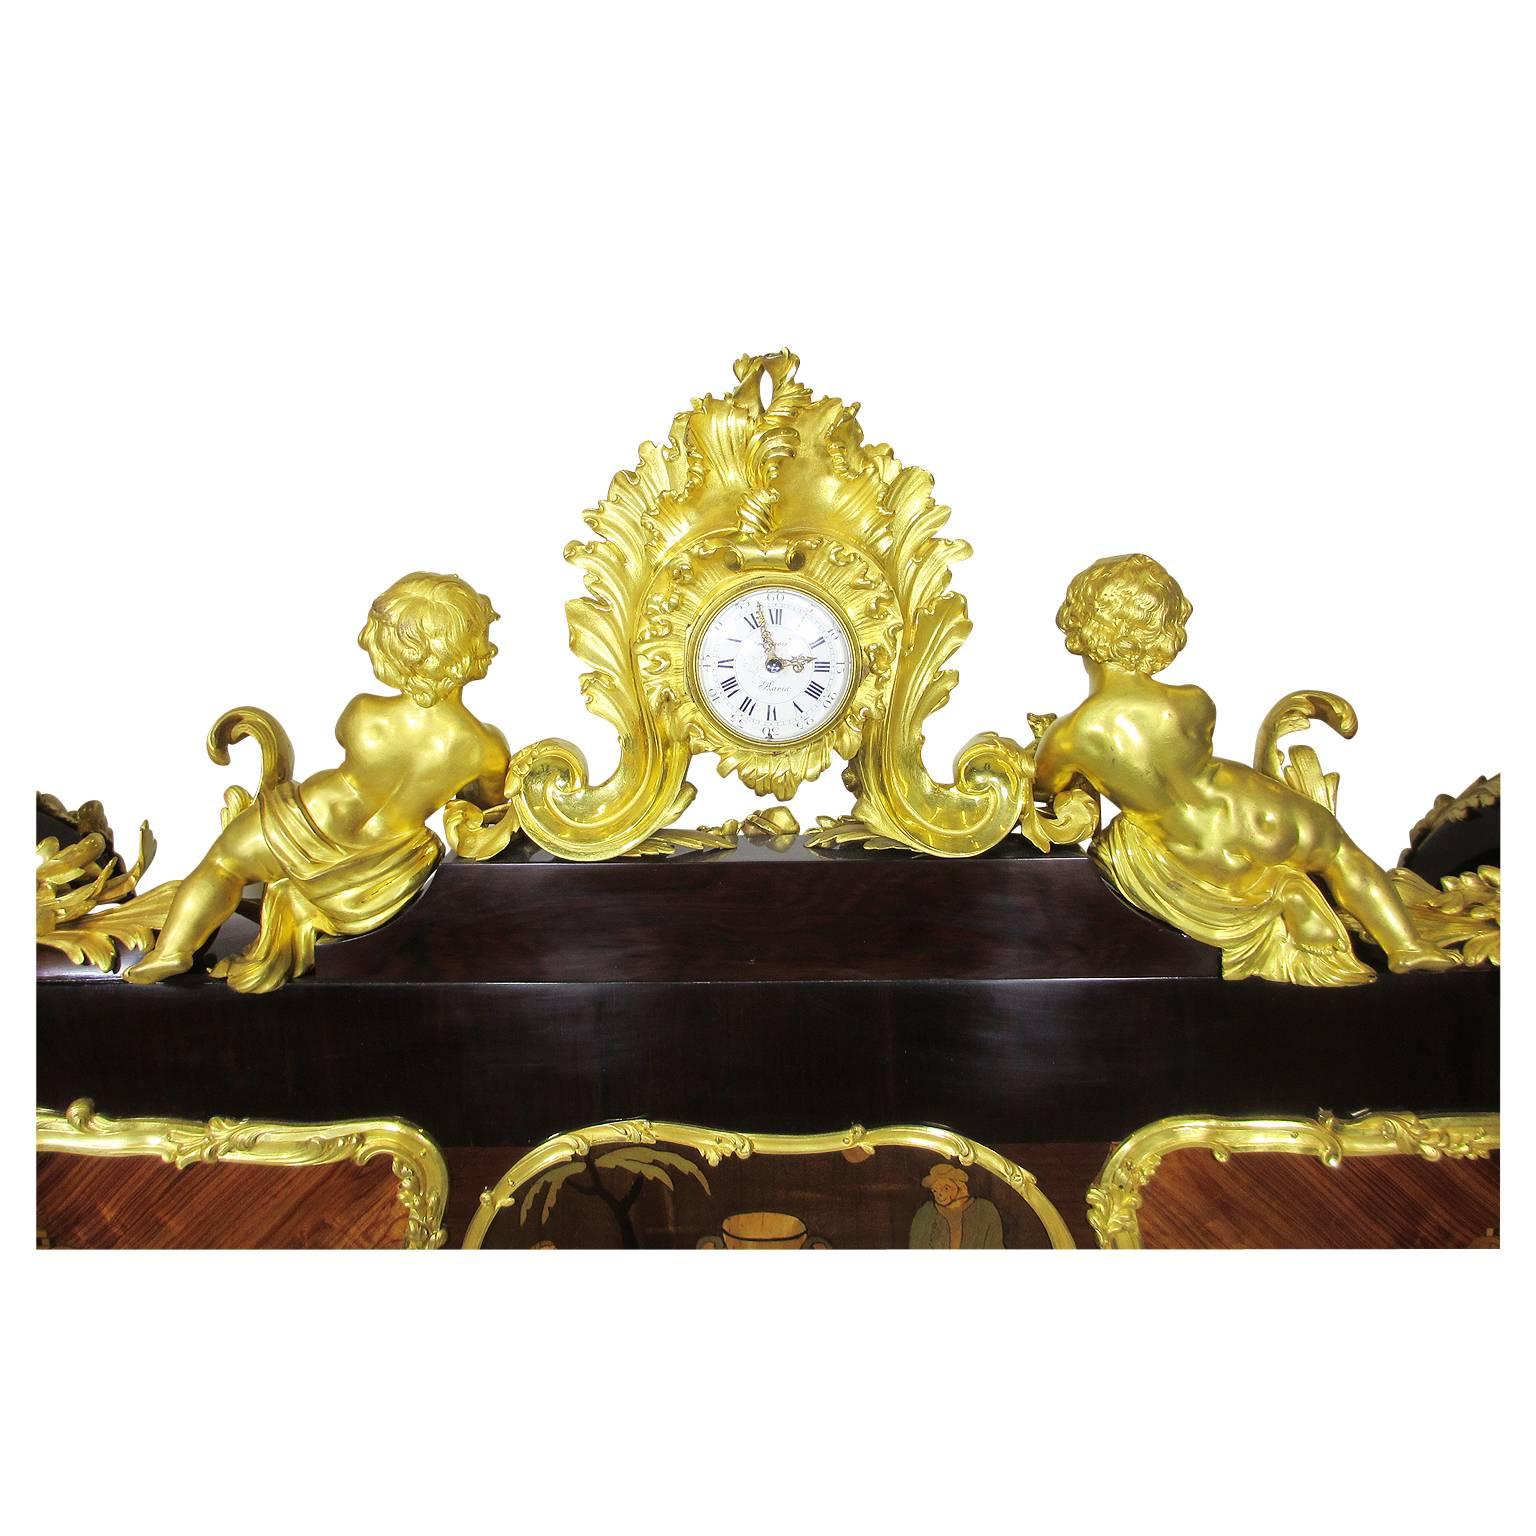 French 19th-Century Louis XV Style Figural Gilt-Bronze Mounted Bureau-Plat Desk In Good Condition For Sale In Los Angeles, CA